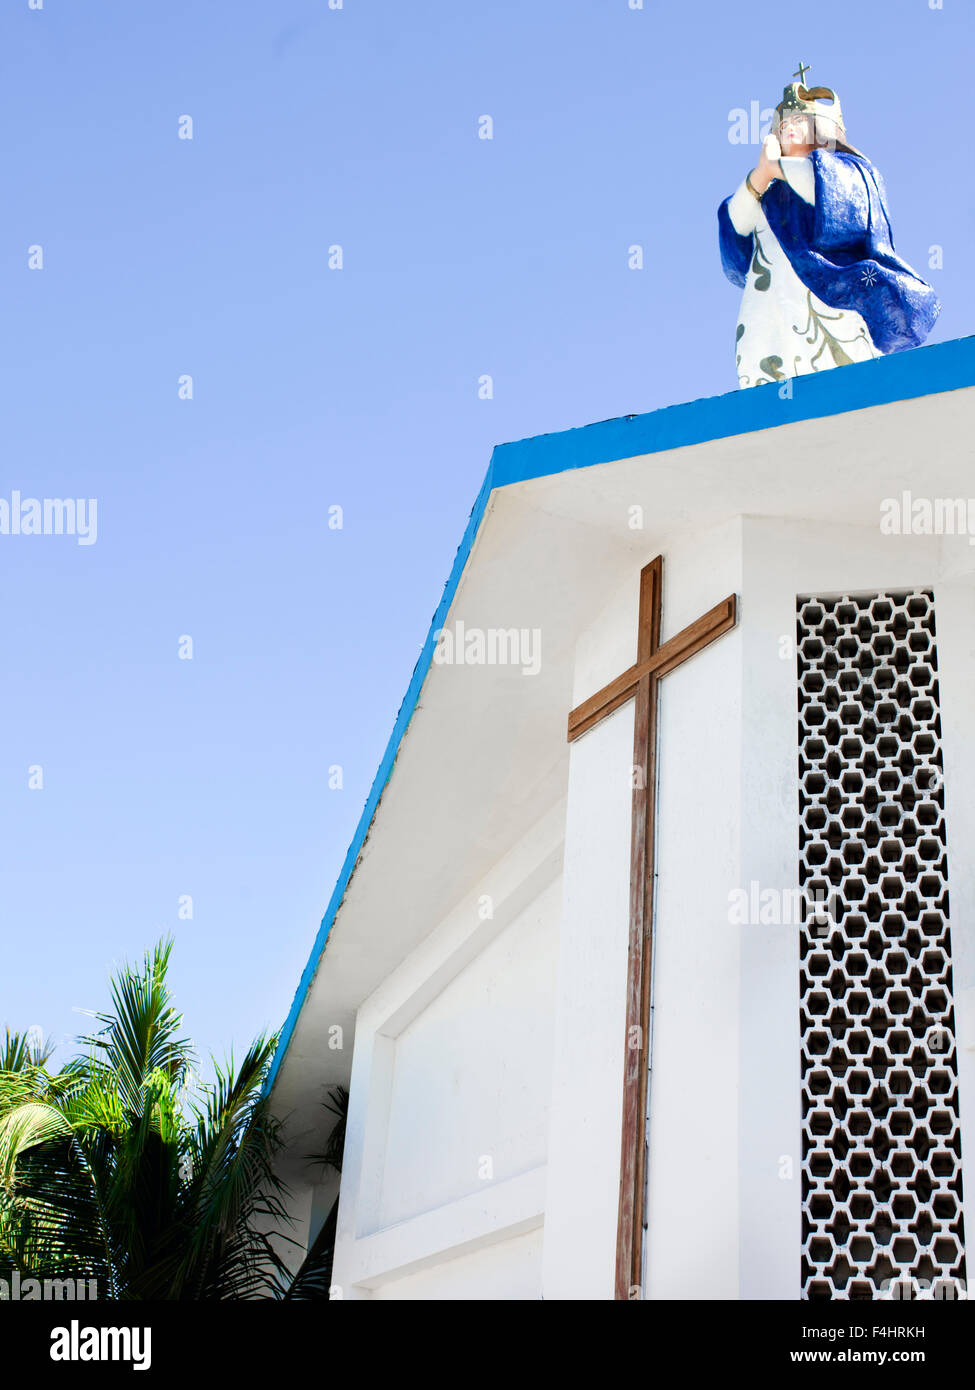 Statue of the Virgin Mary on the roof of the Church of the Immaculate Conception, Isla Mujeres,Mexico Stock Photo